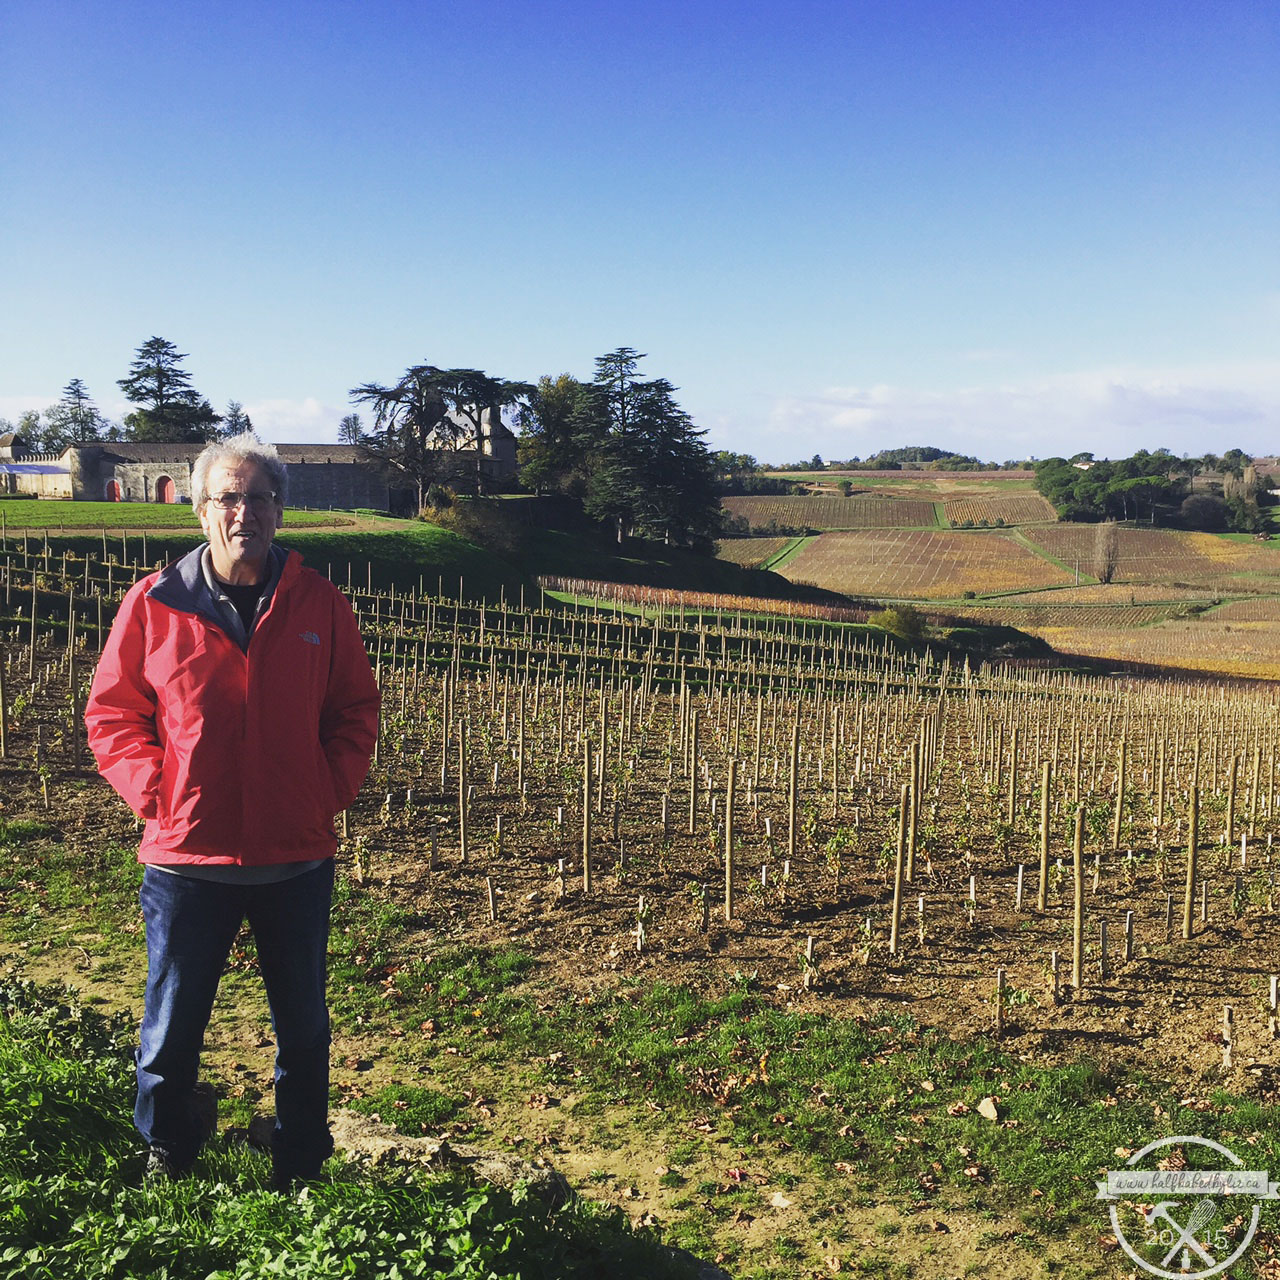 25 - Dad + Wine Country